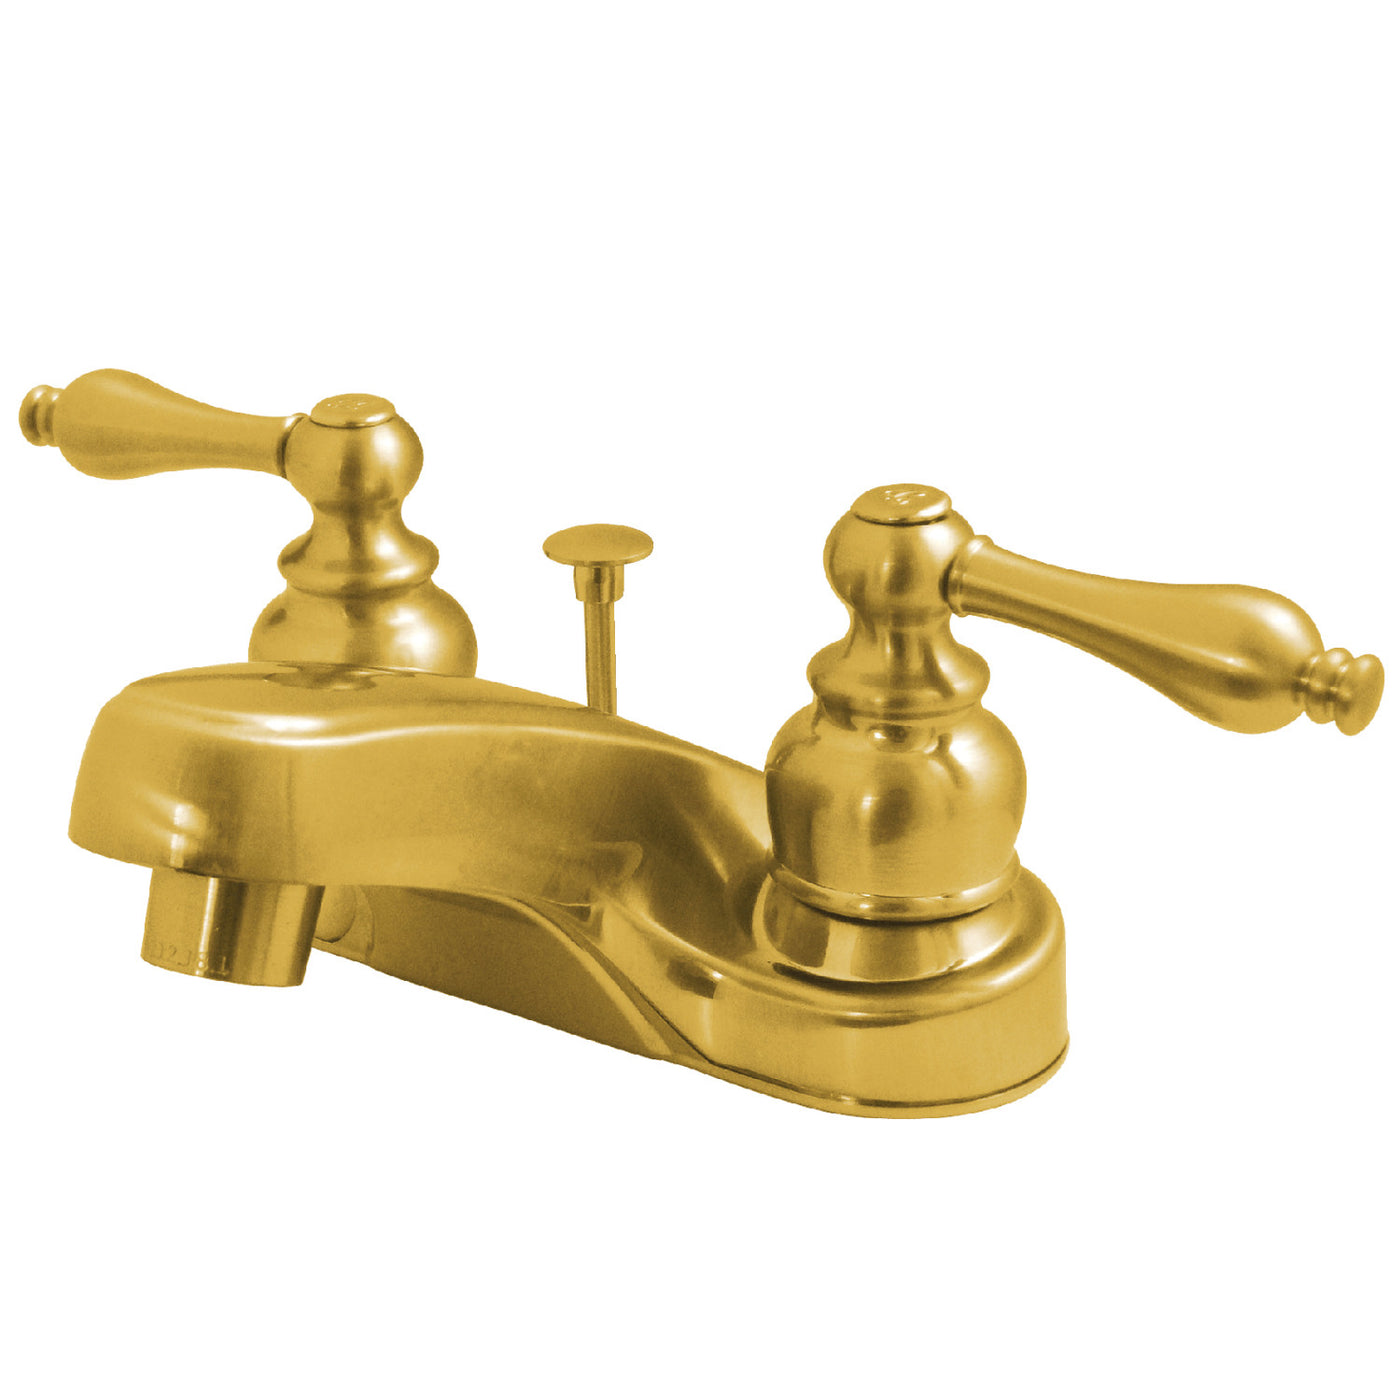 Elements of Design EB252AL 4-Inch Centerset Bathroom Faucet with Brass Pop-Up, Polished Brass